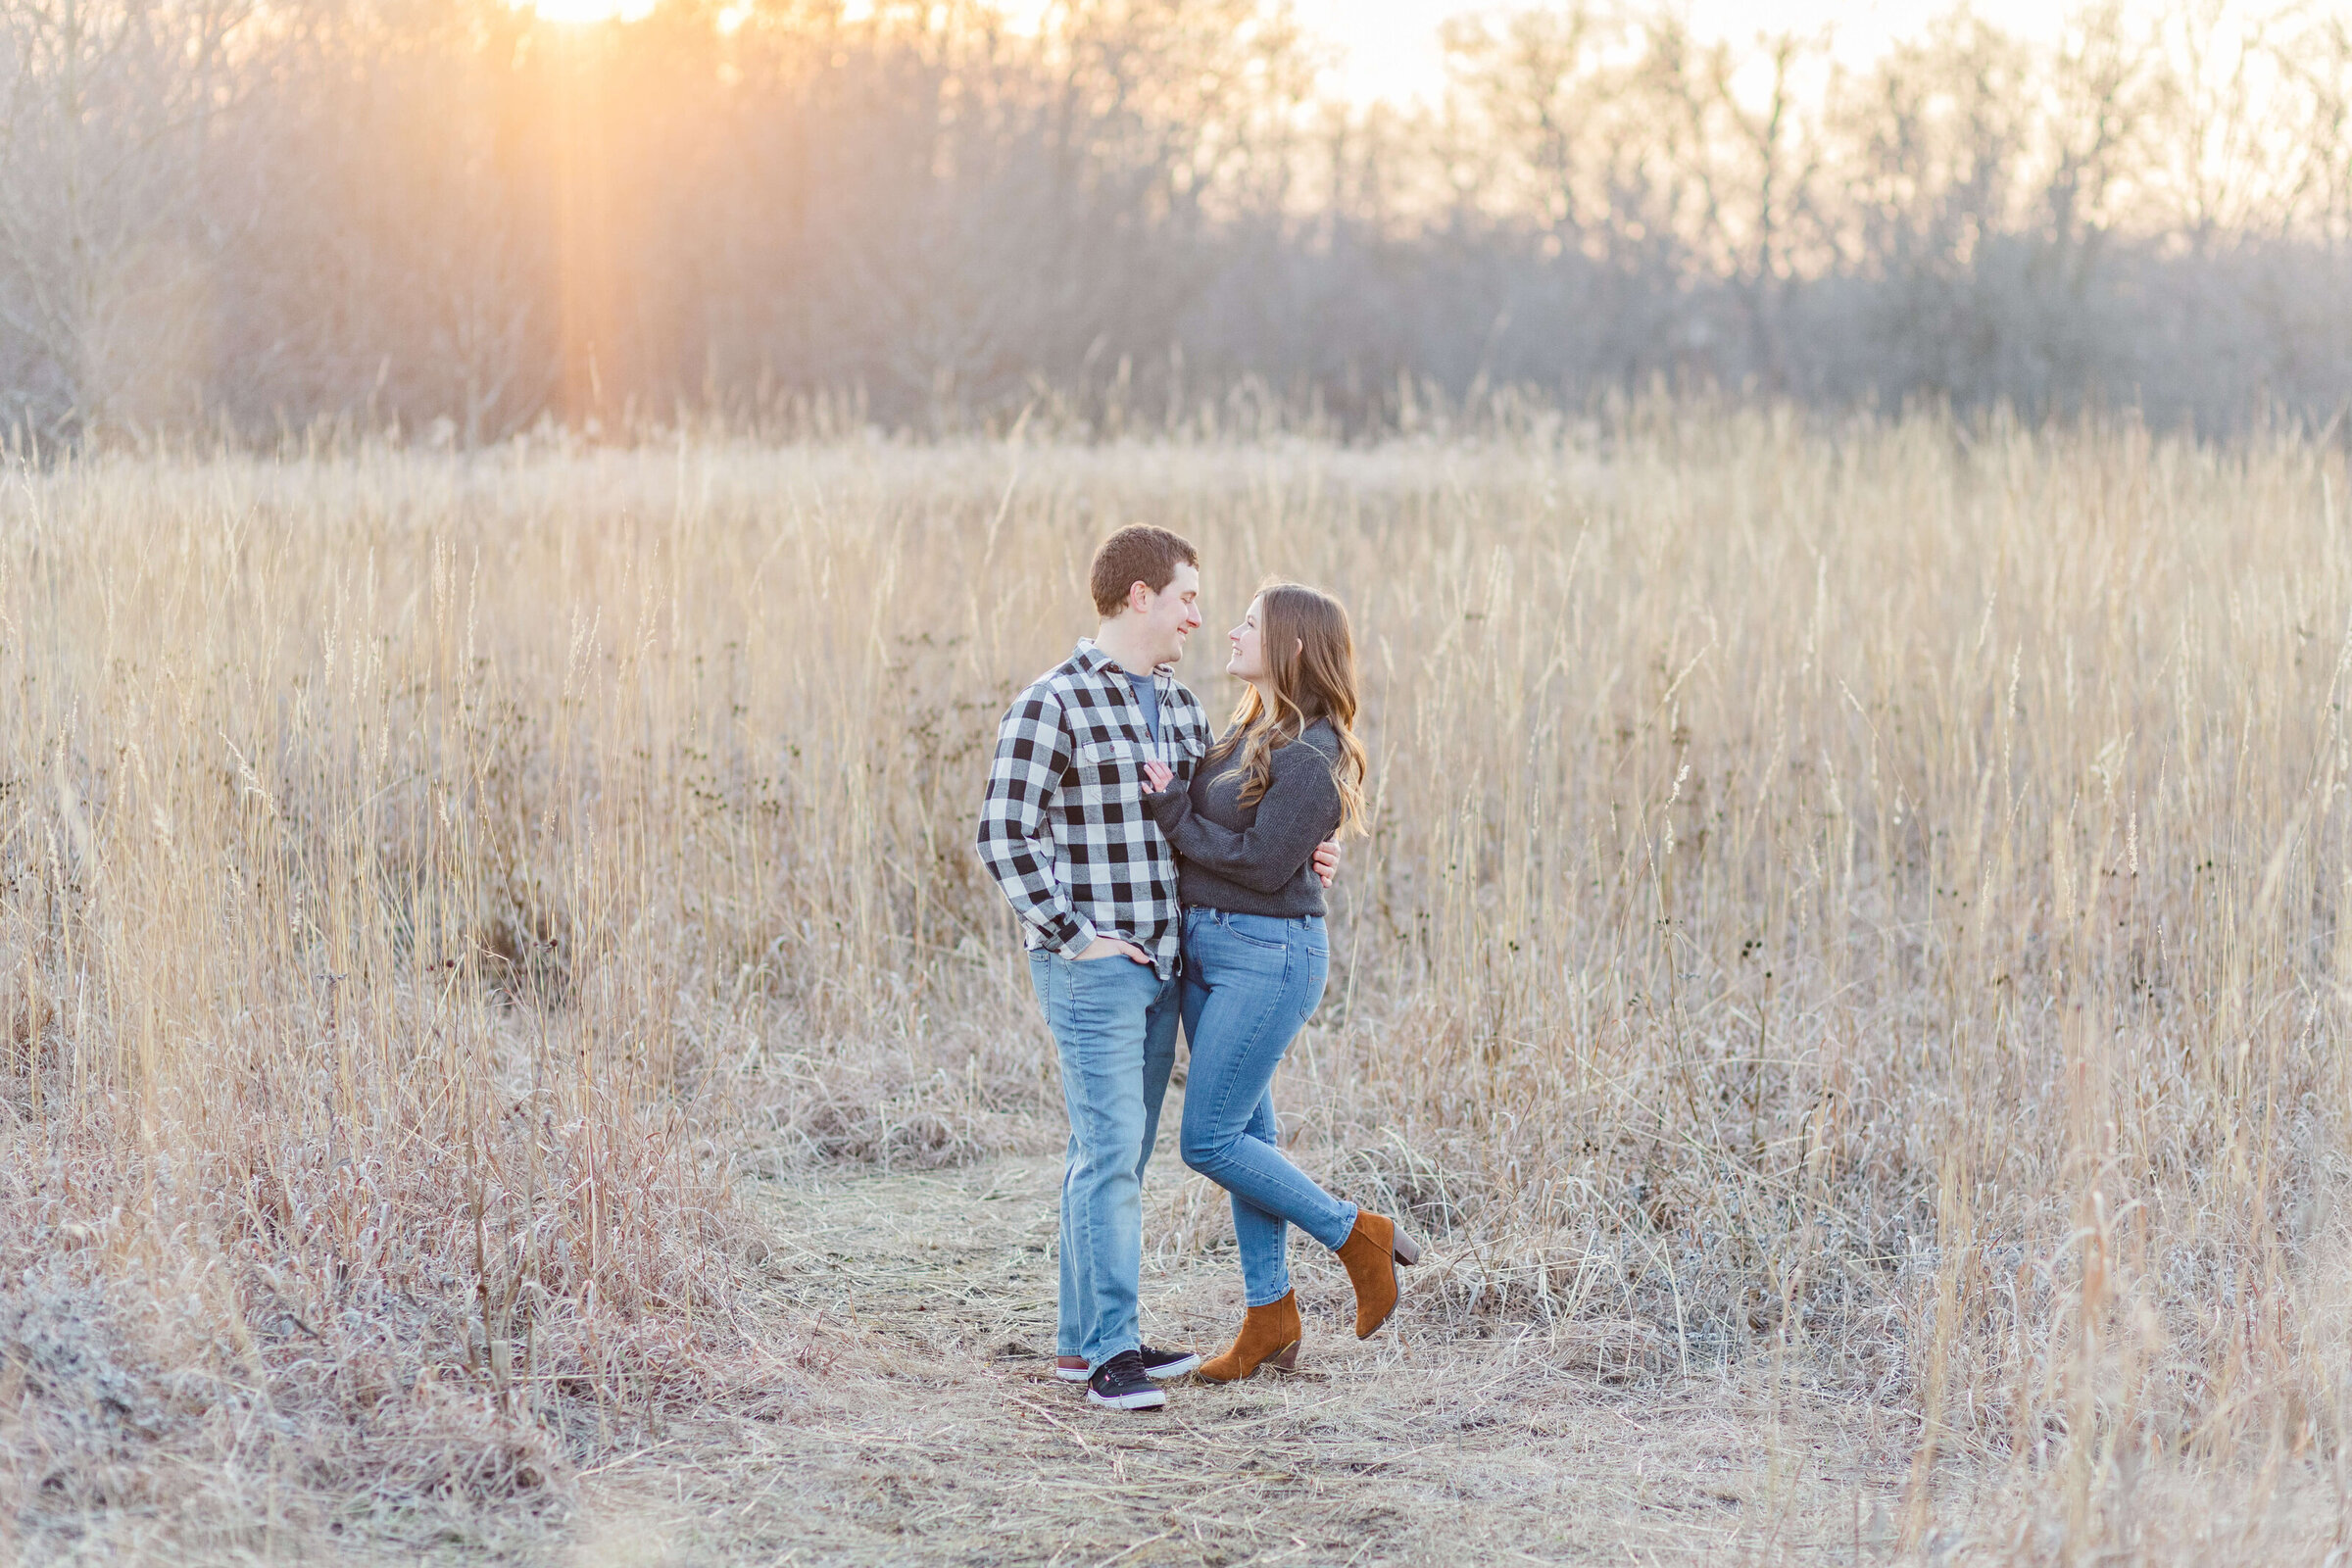 A couple is in in a field with the sun glowing on them. They're both in jeans and grey shirts